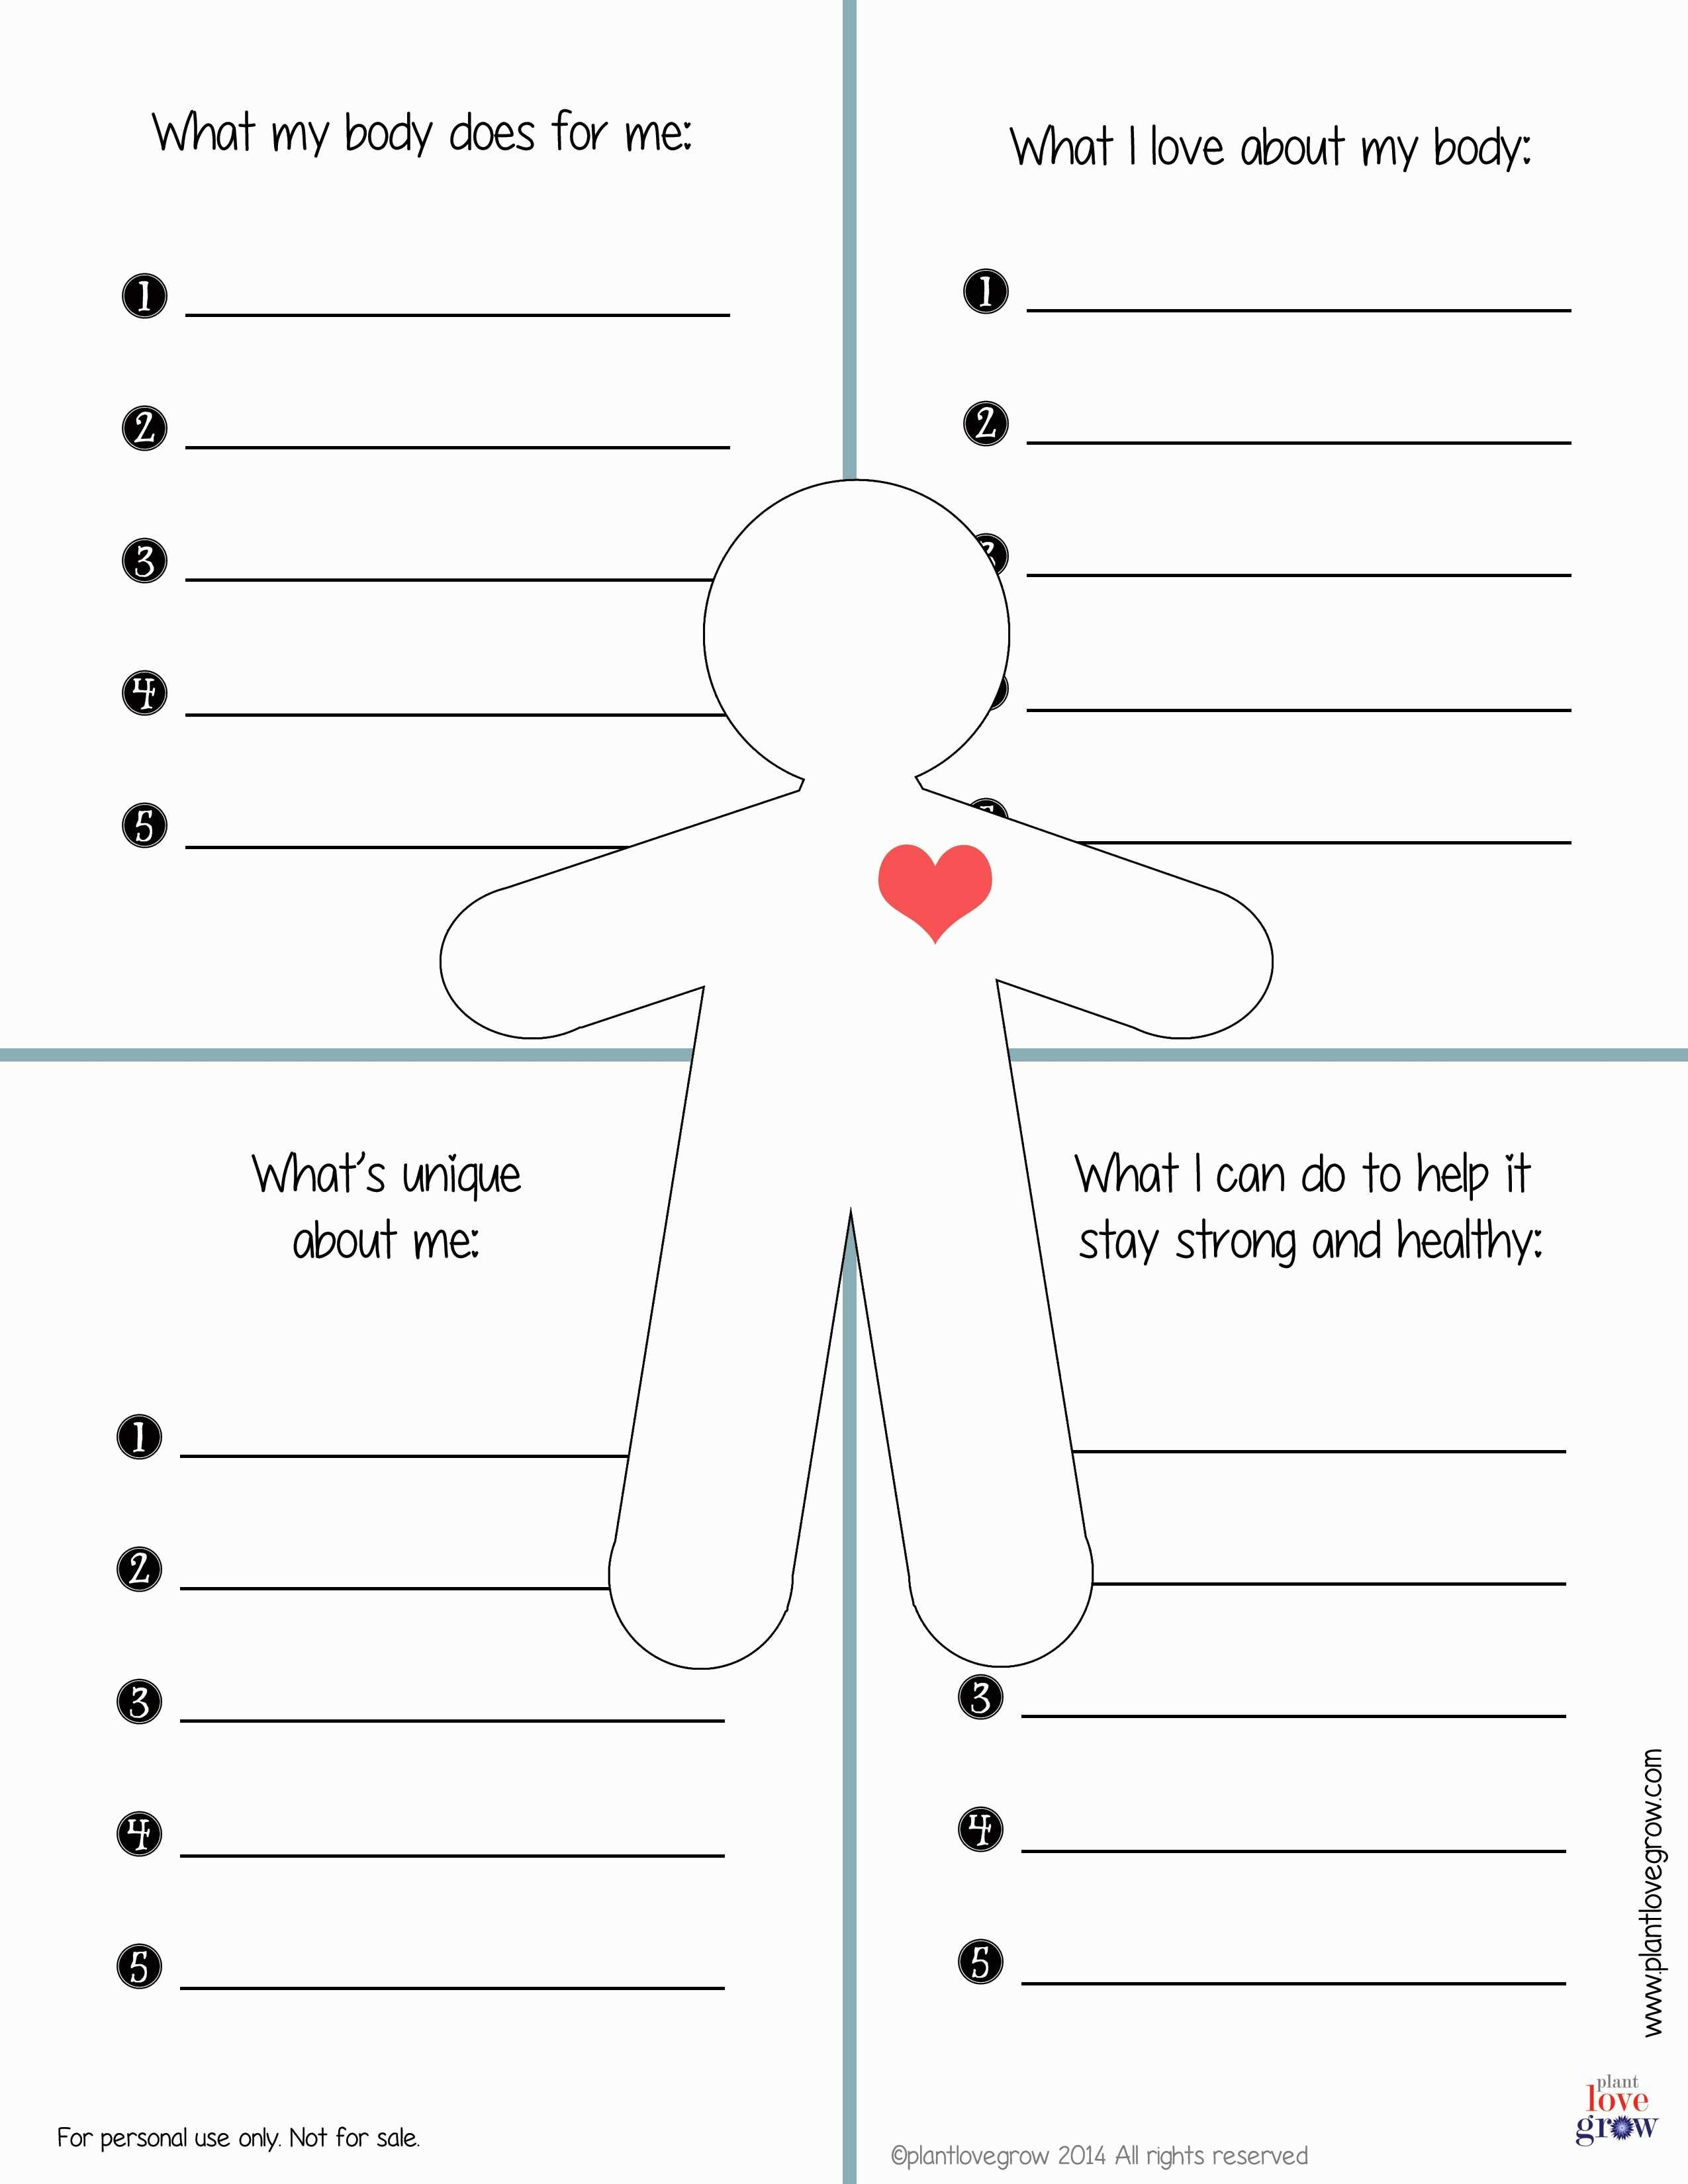 30 Self Esteem Worksheets To Print  Kittybabylove Intended For Self Esteem Worksheets For Teens